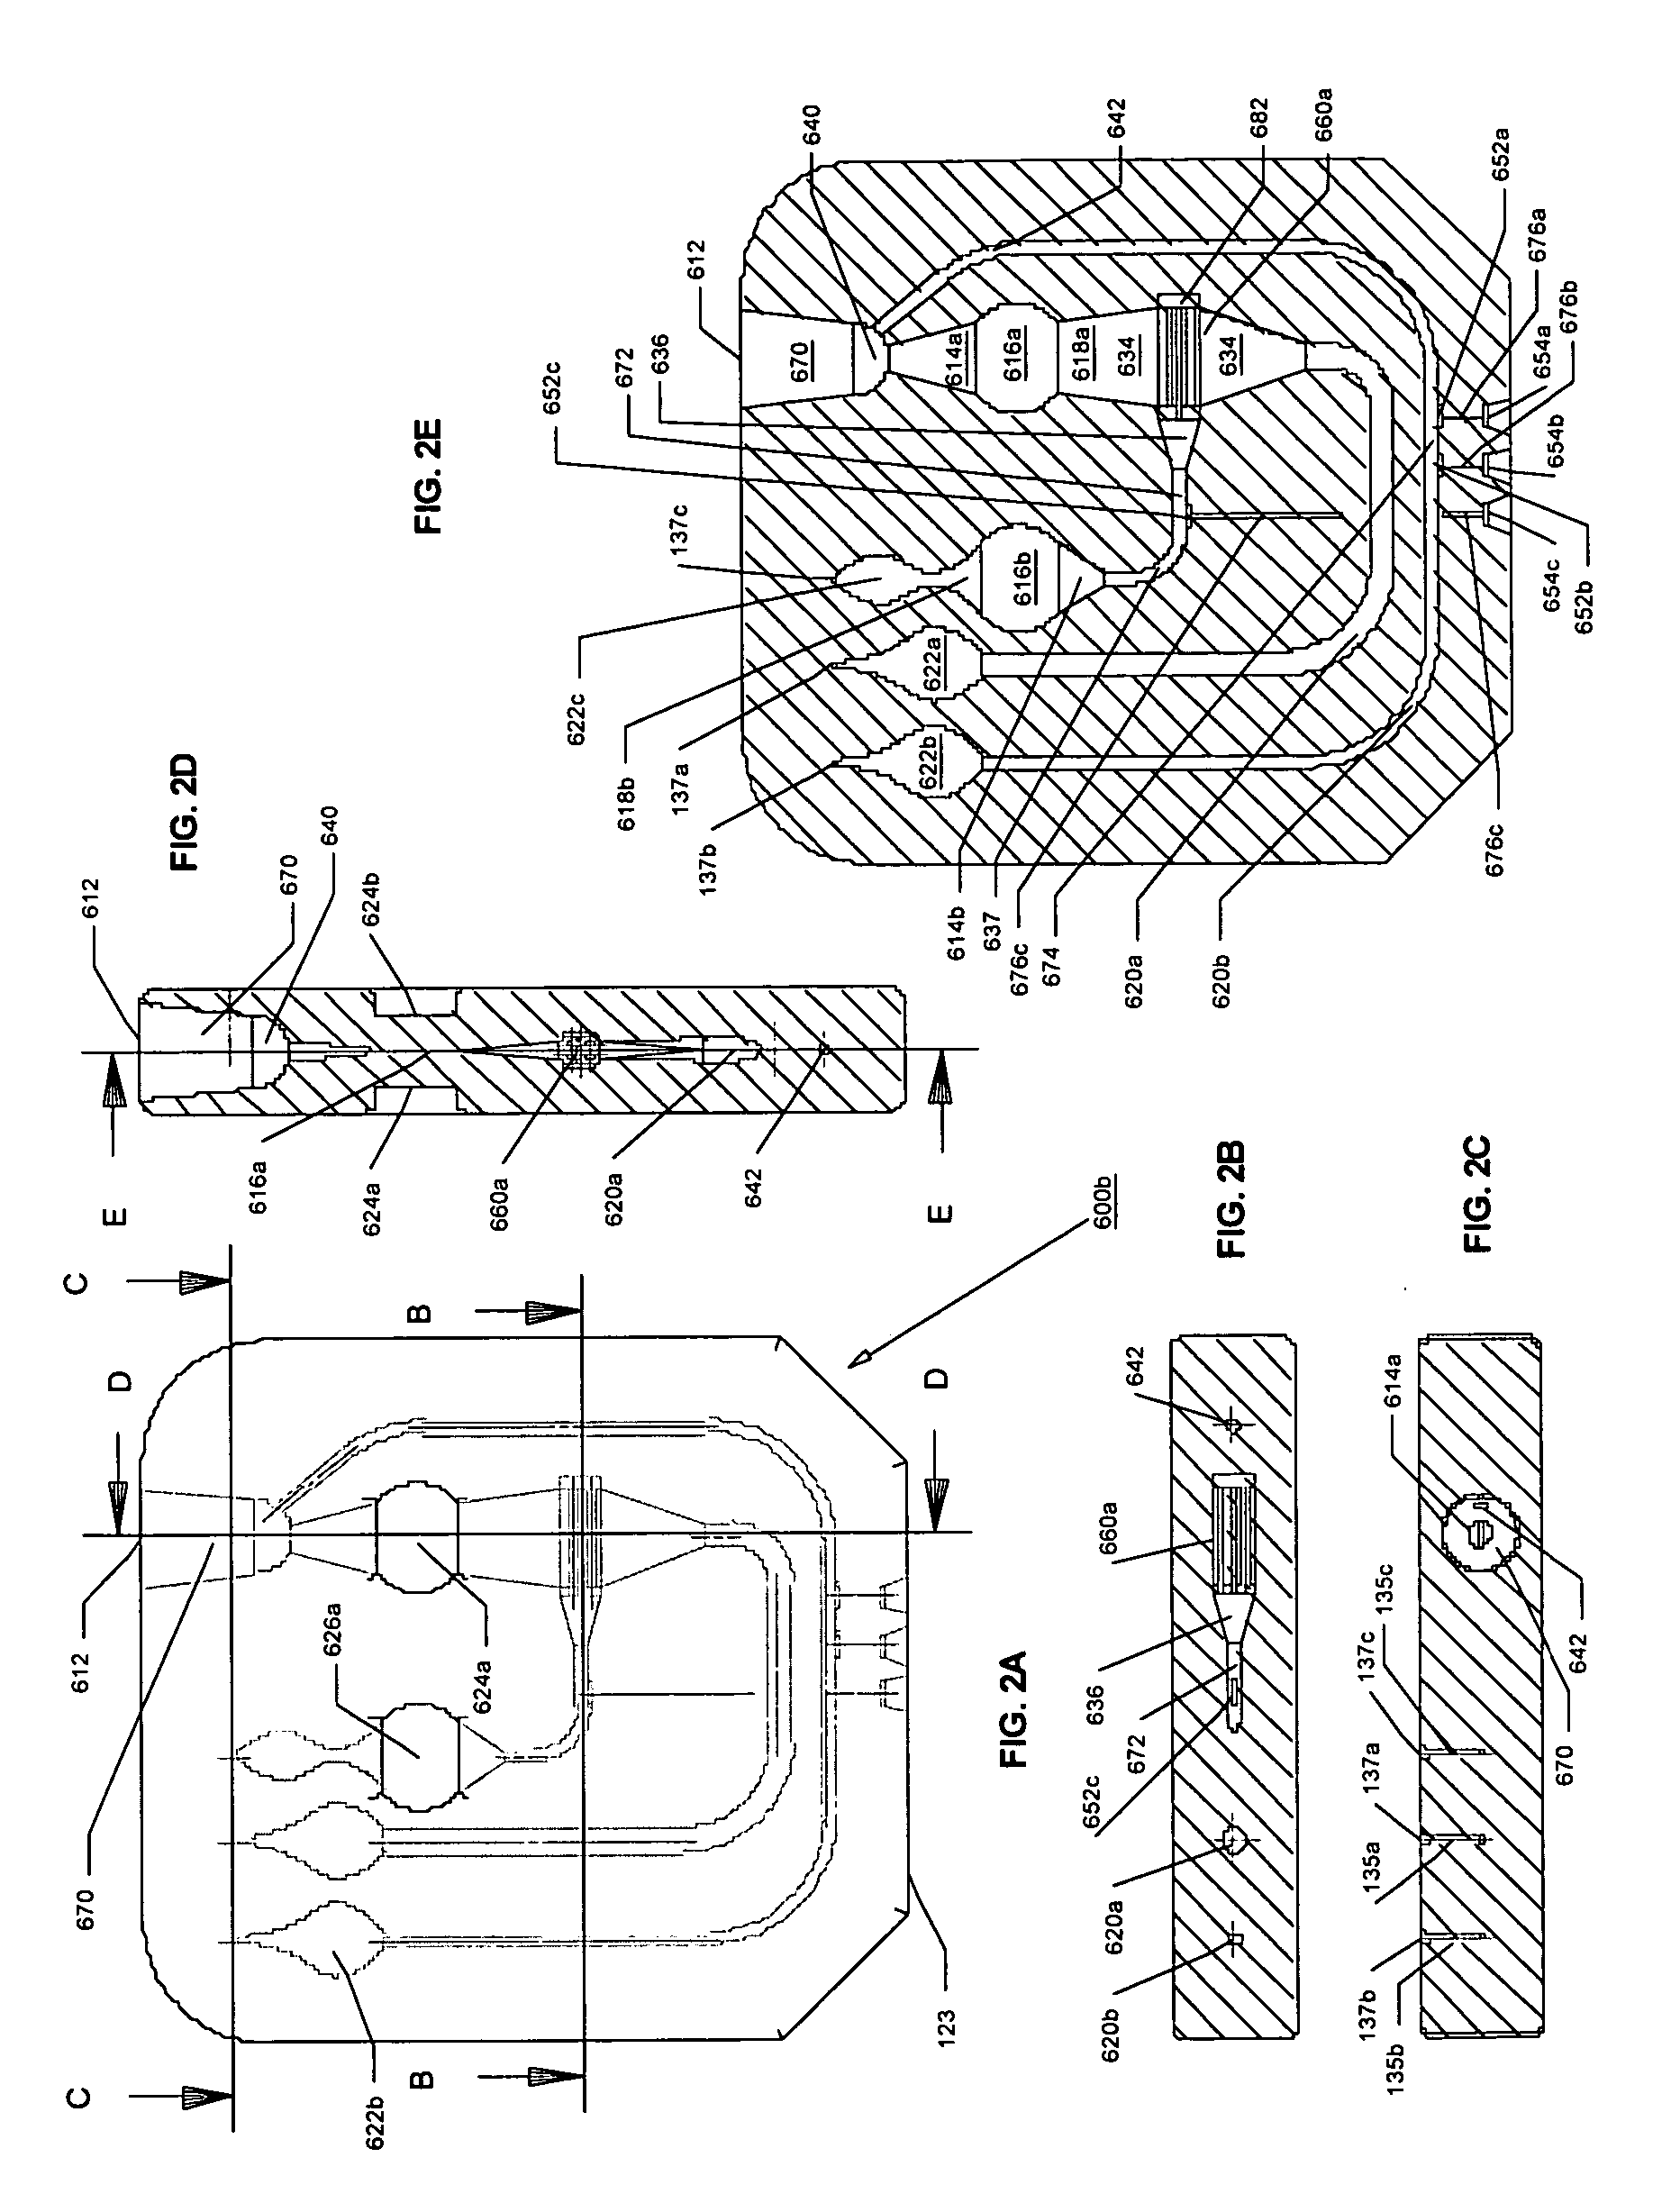 Joint-diagnostic spectroscopic and biosensor meter